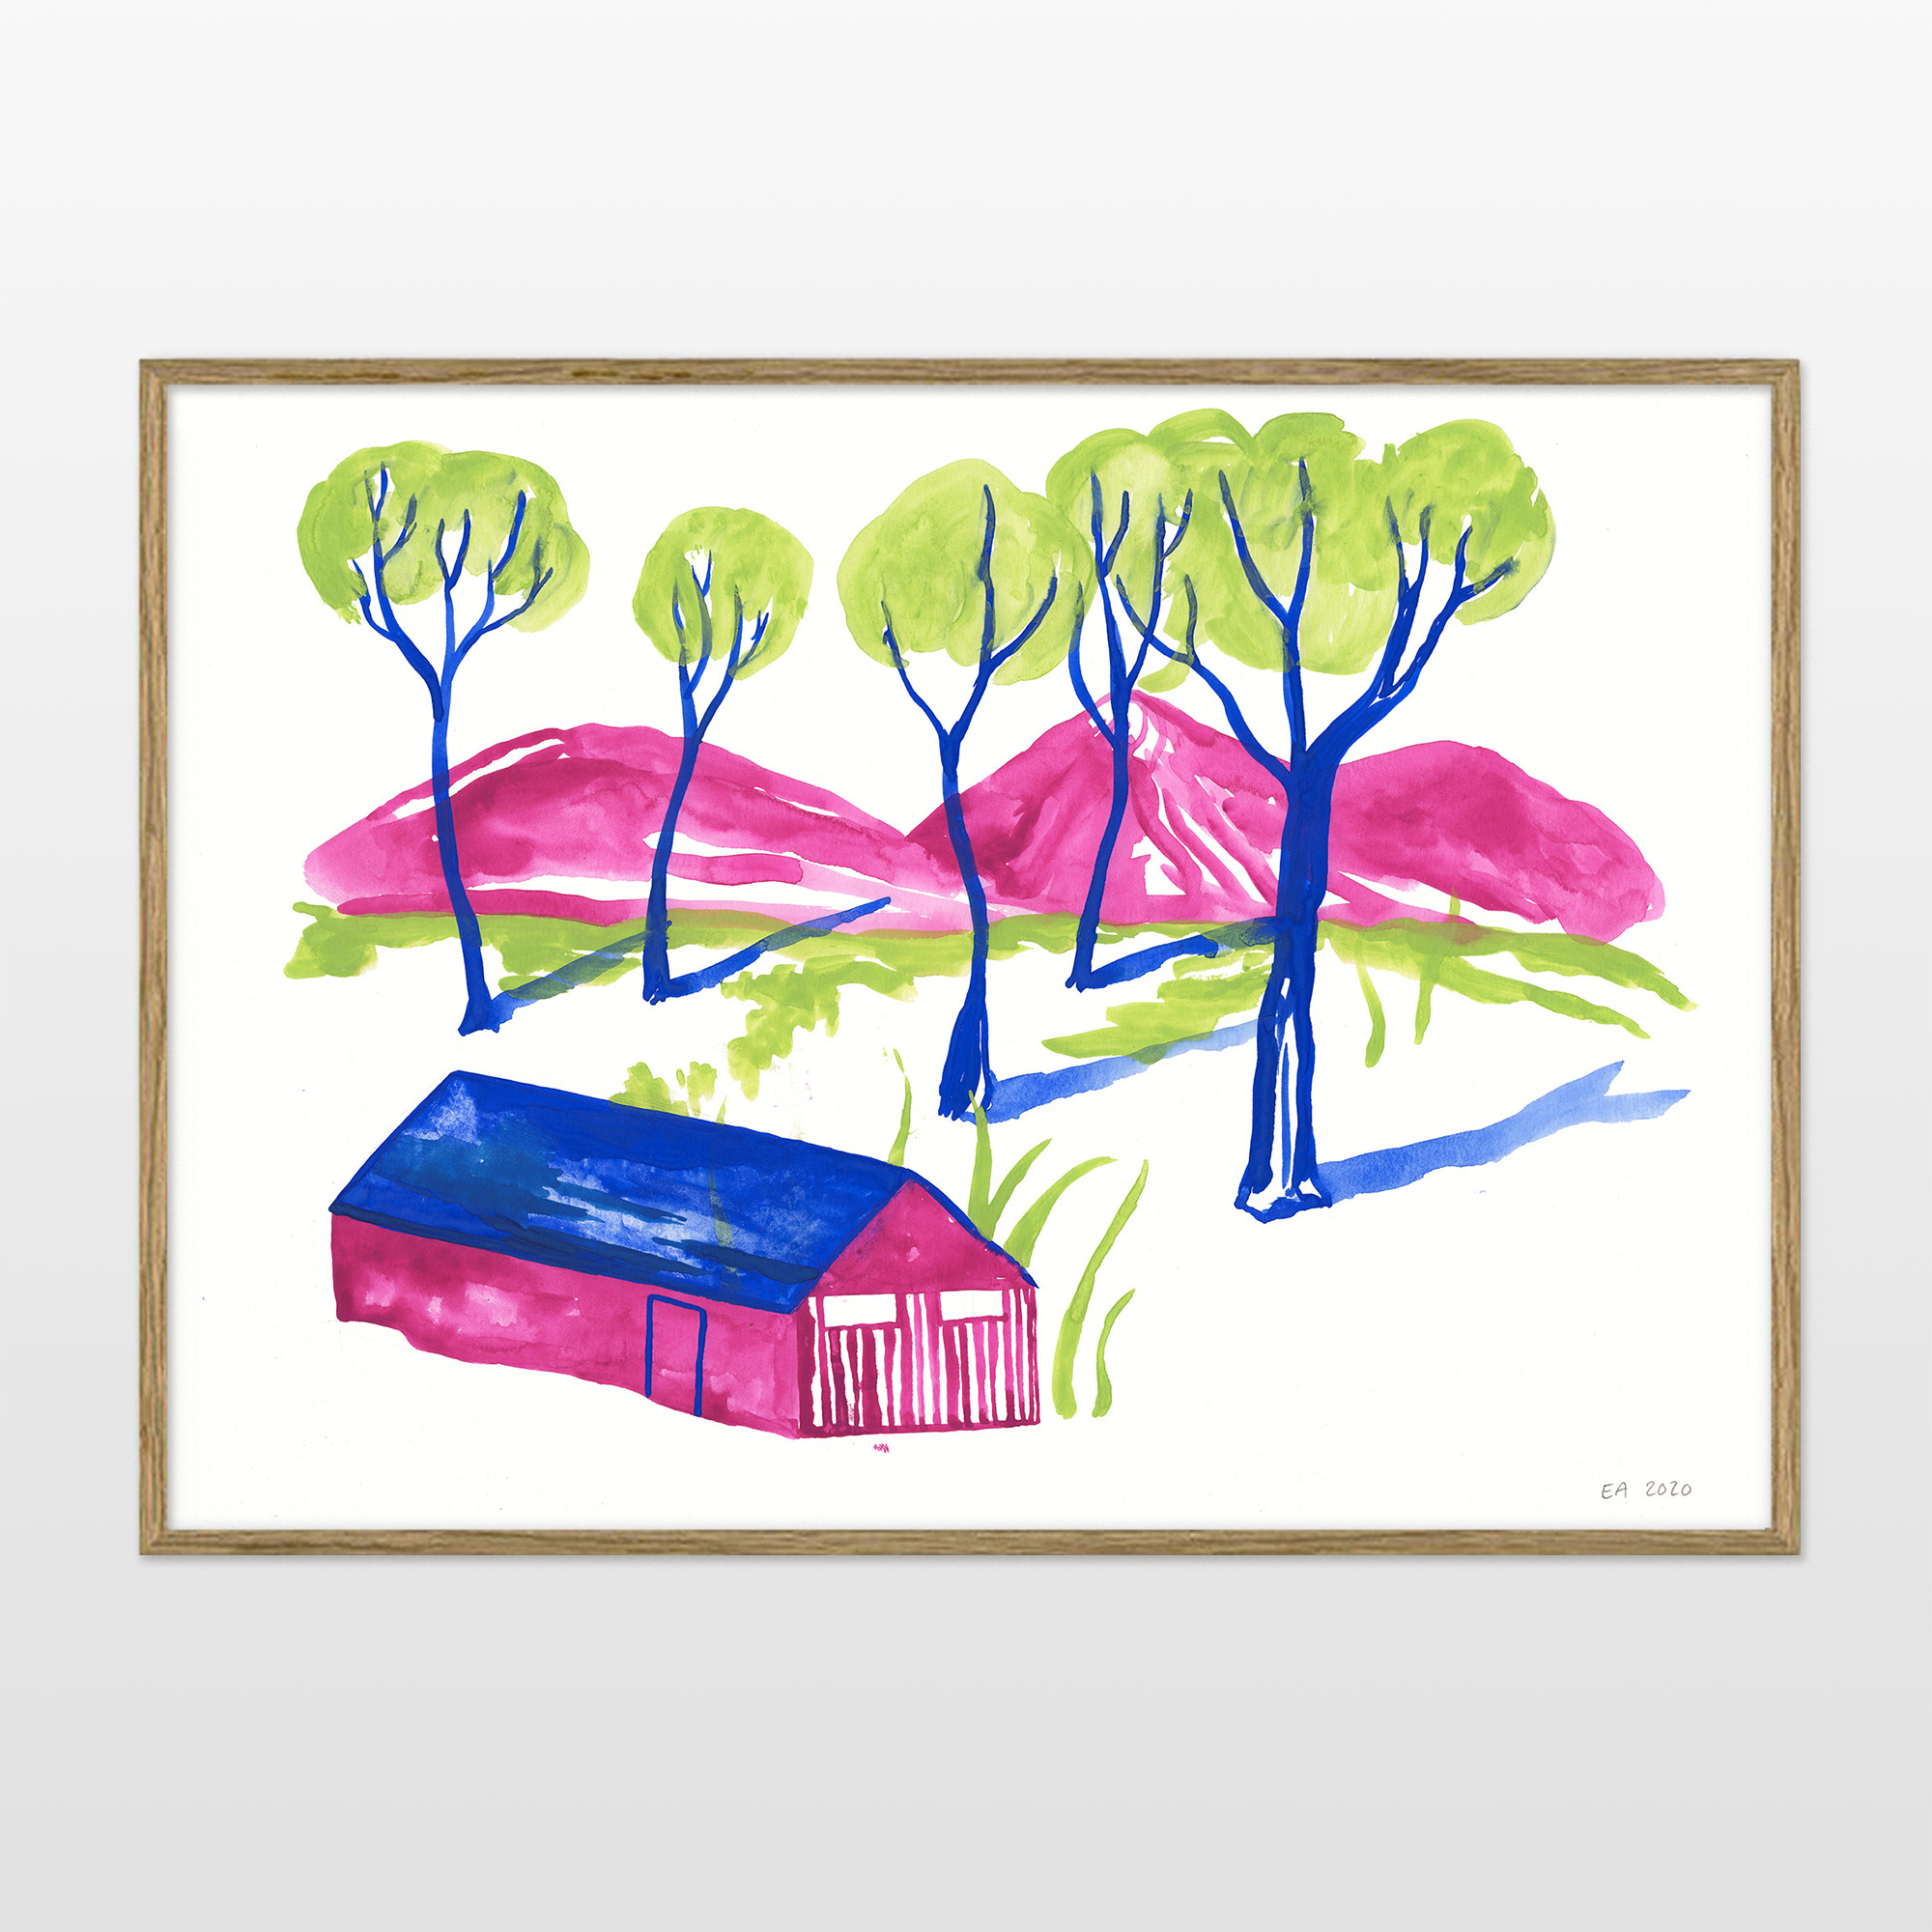 drawings, gouache-painting, watercolor-paintings, aesthetic, figurative, graphical, illustrative, landscape, pop, architecture, botany, nature, people, blue, green, violet, gouache, ink, paper, beautiful, danish, decorative, design, forest, houses, interior, interior-design, modern, mountains, nordic, plants, posters, pretty, prints, scandinavien, trees, Buy original high quality art. Paintings, drawings, limited edition prints & posters by talented artists.